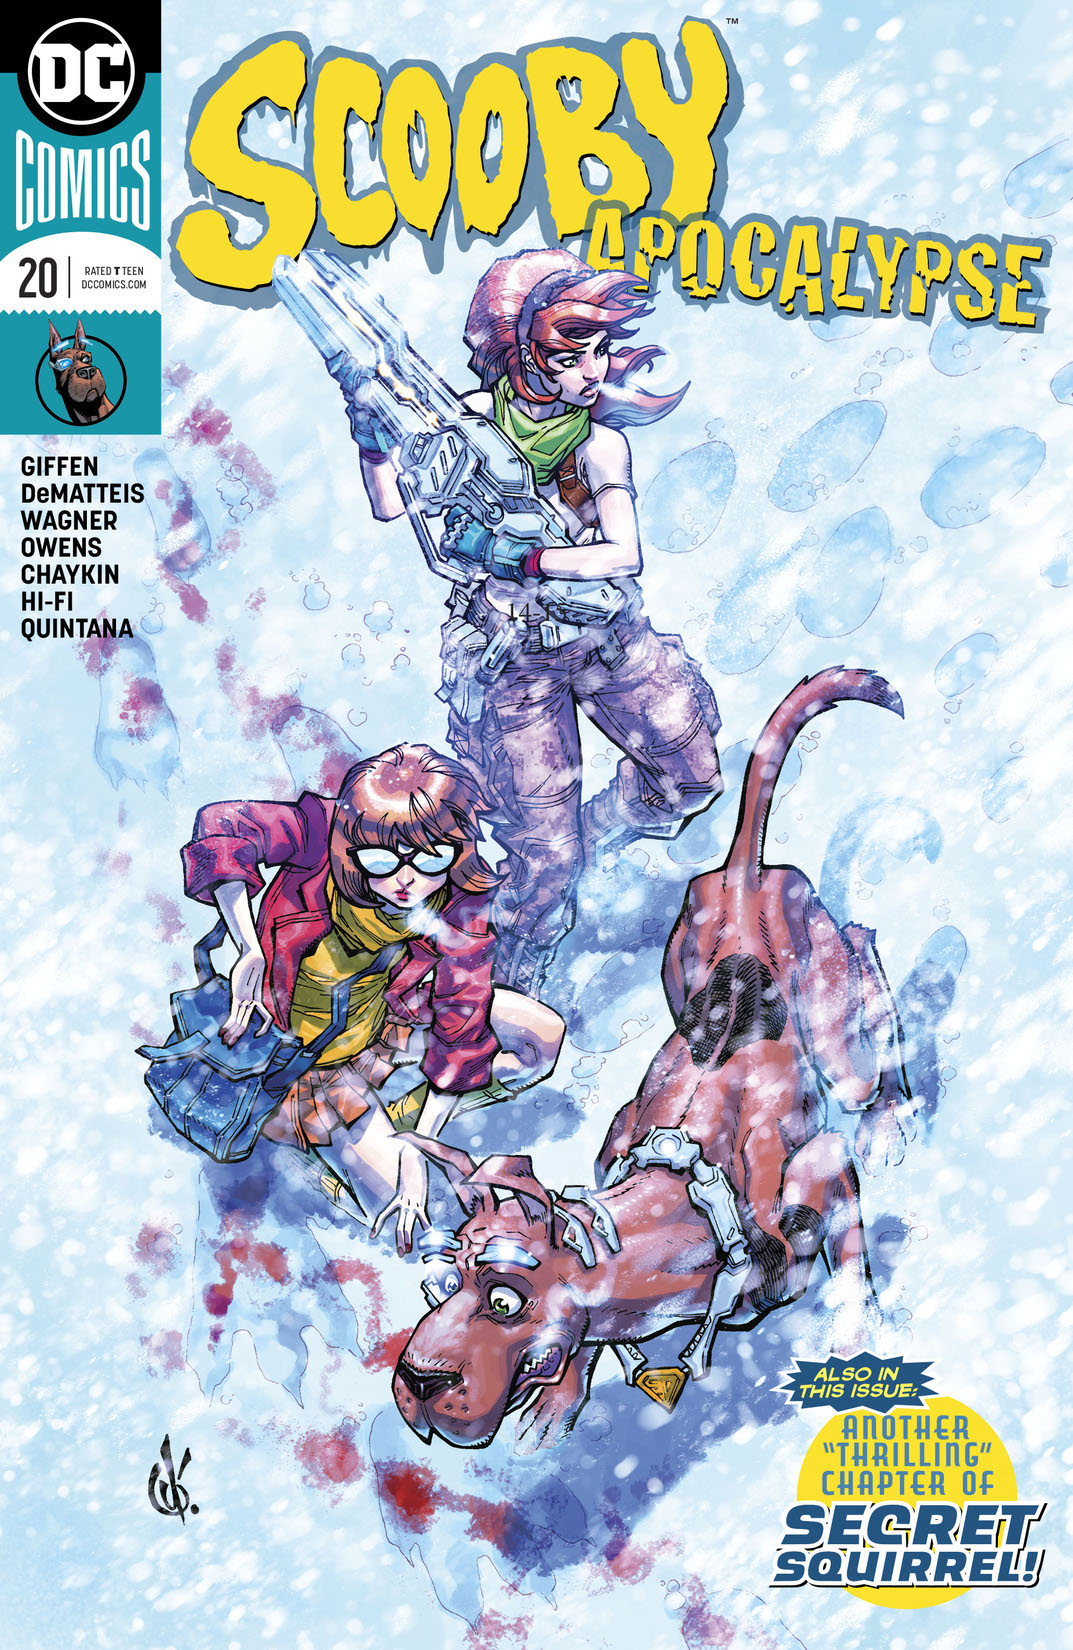 Scooby Apocalypse #20 preview images